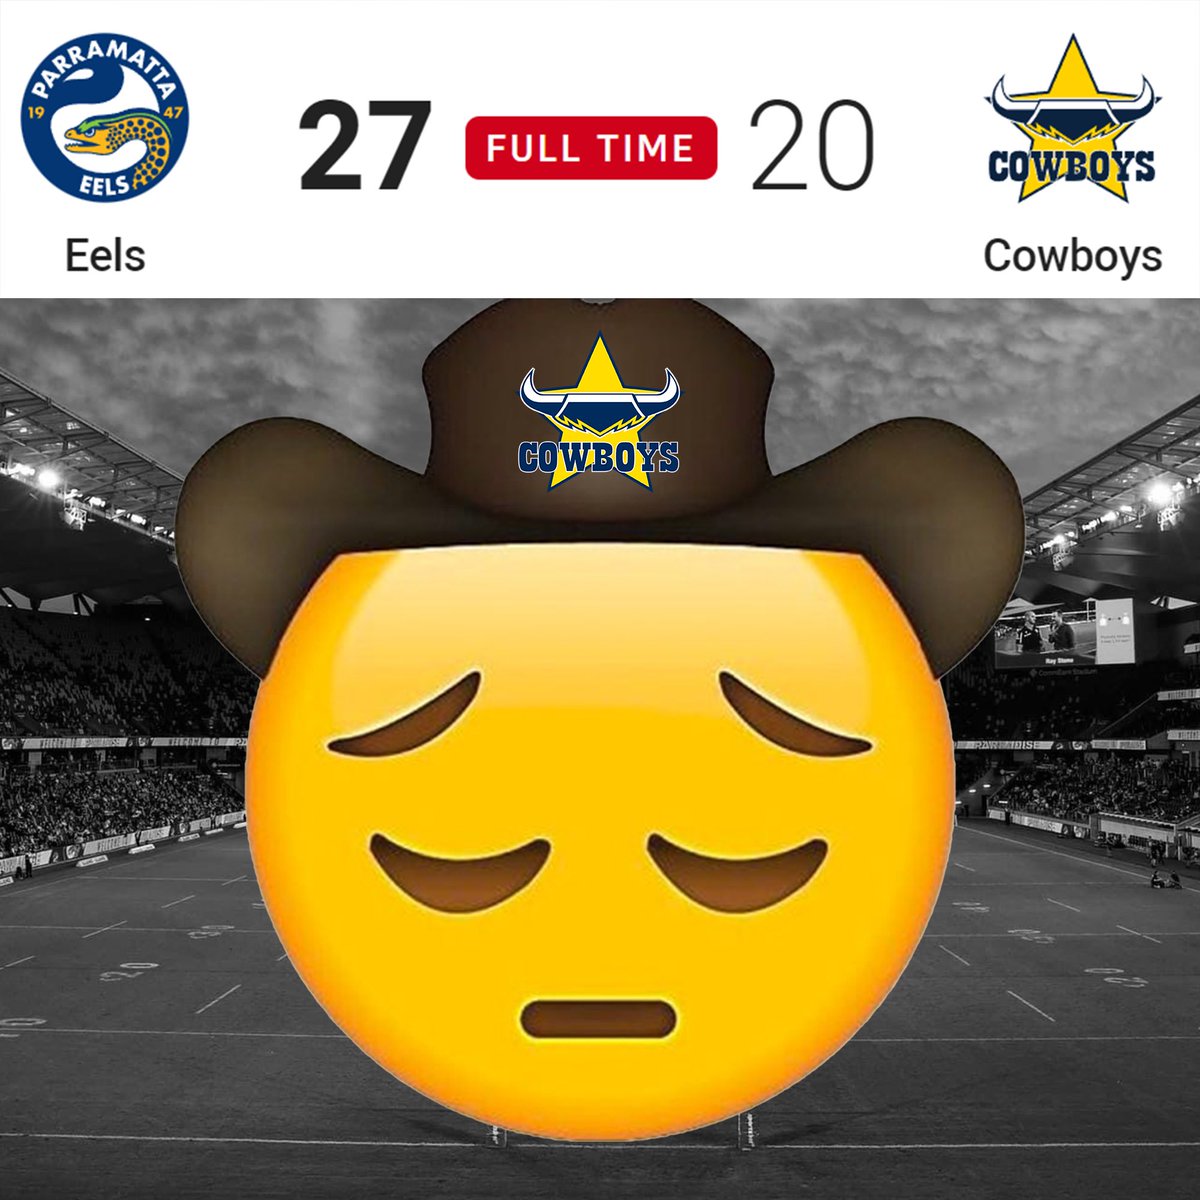 There’s no more yee in my haw, partner.